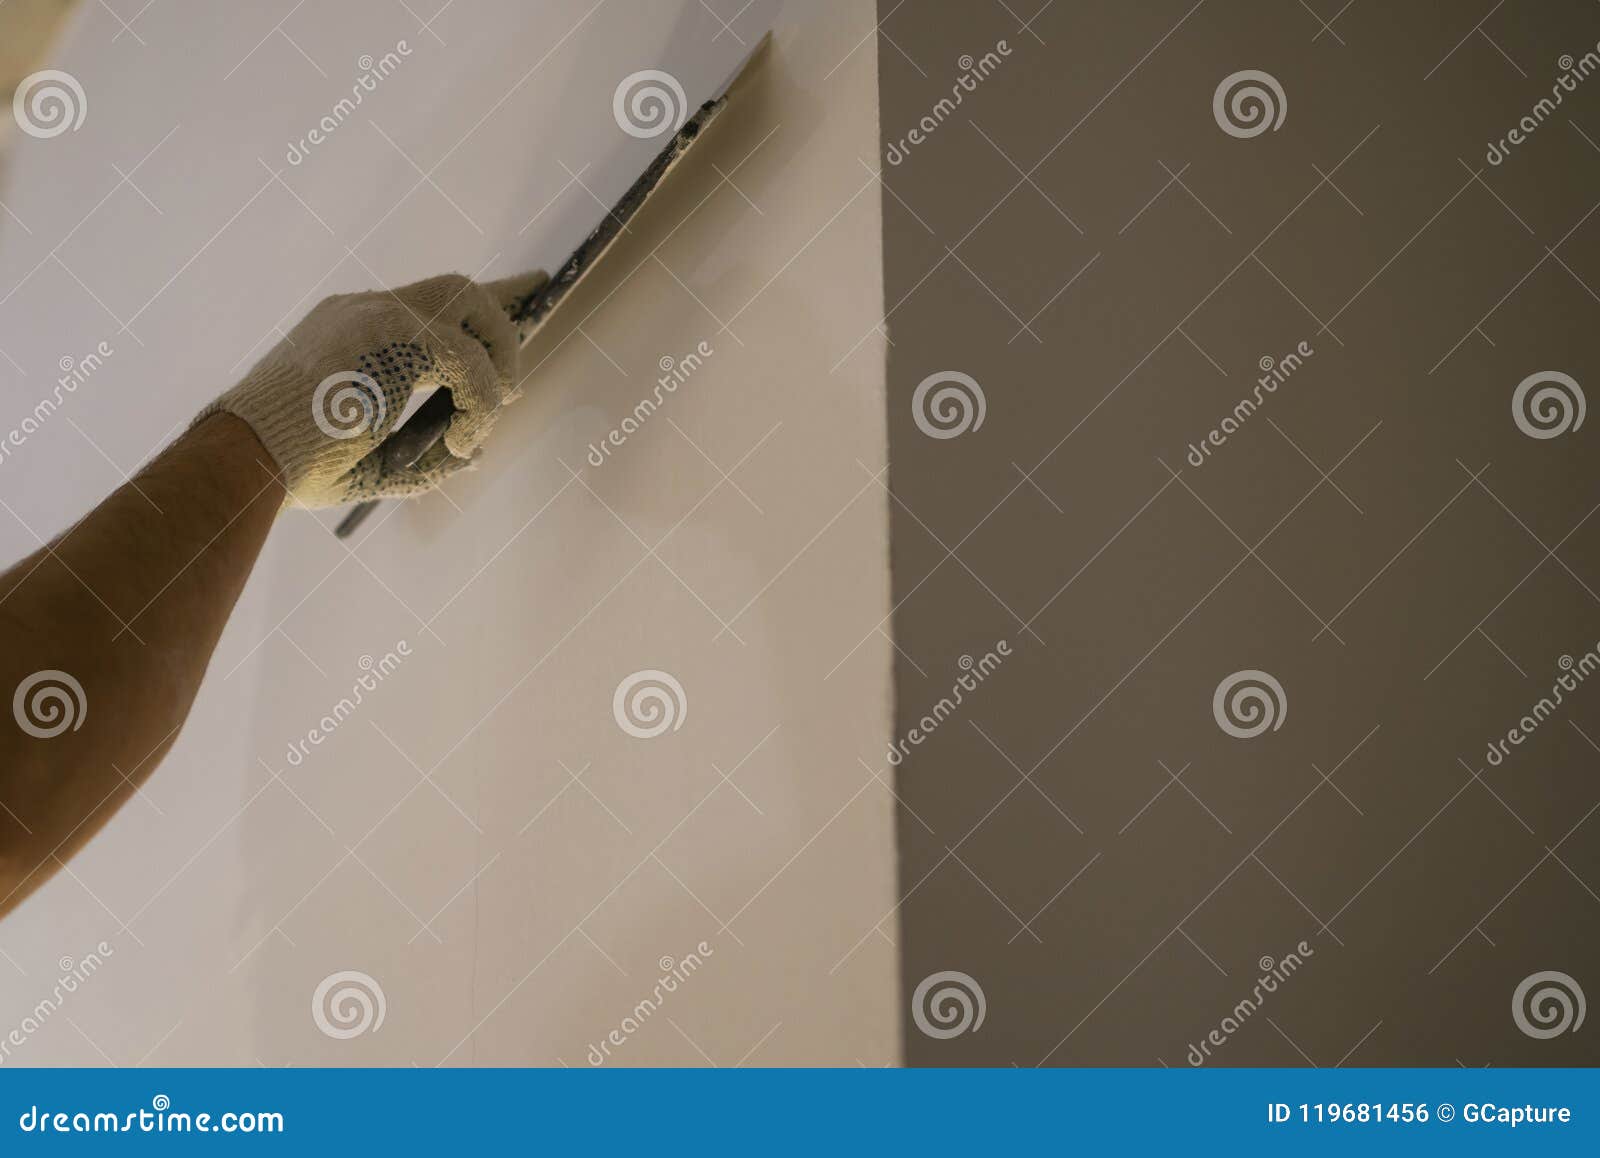 Worker Applying Putty On The Wall With Putty Knife Stock Photo